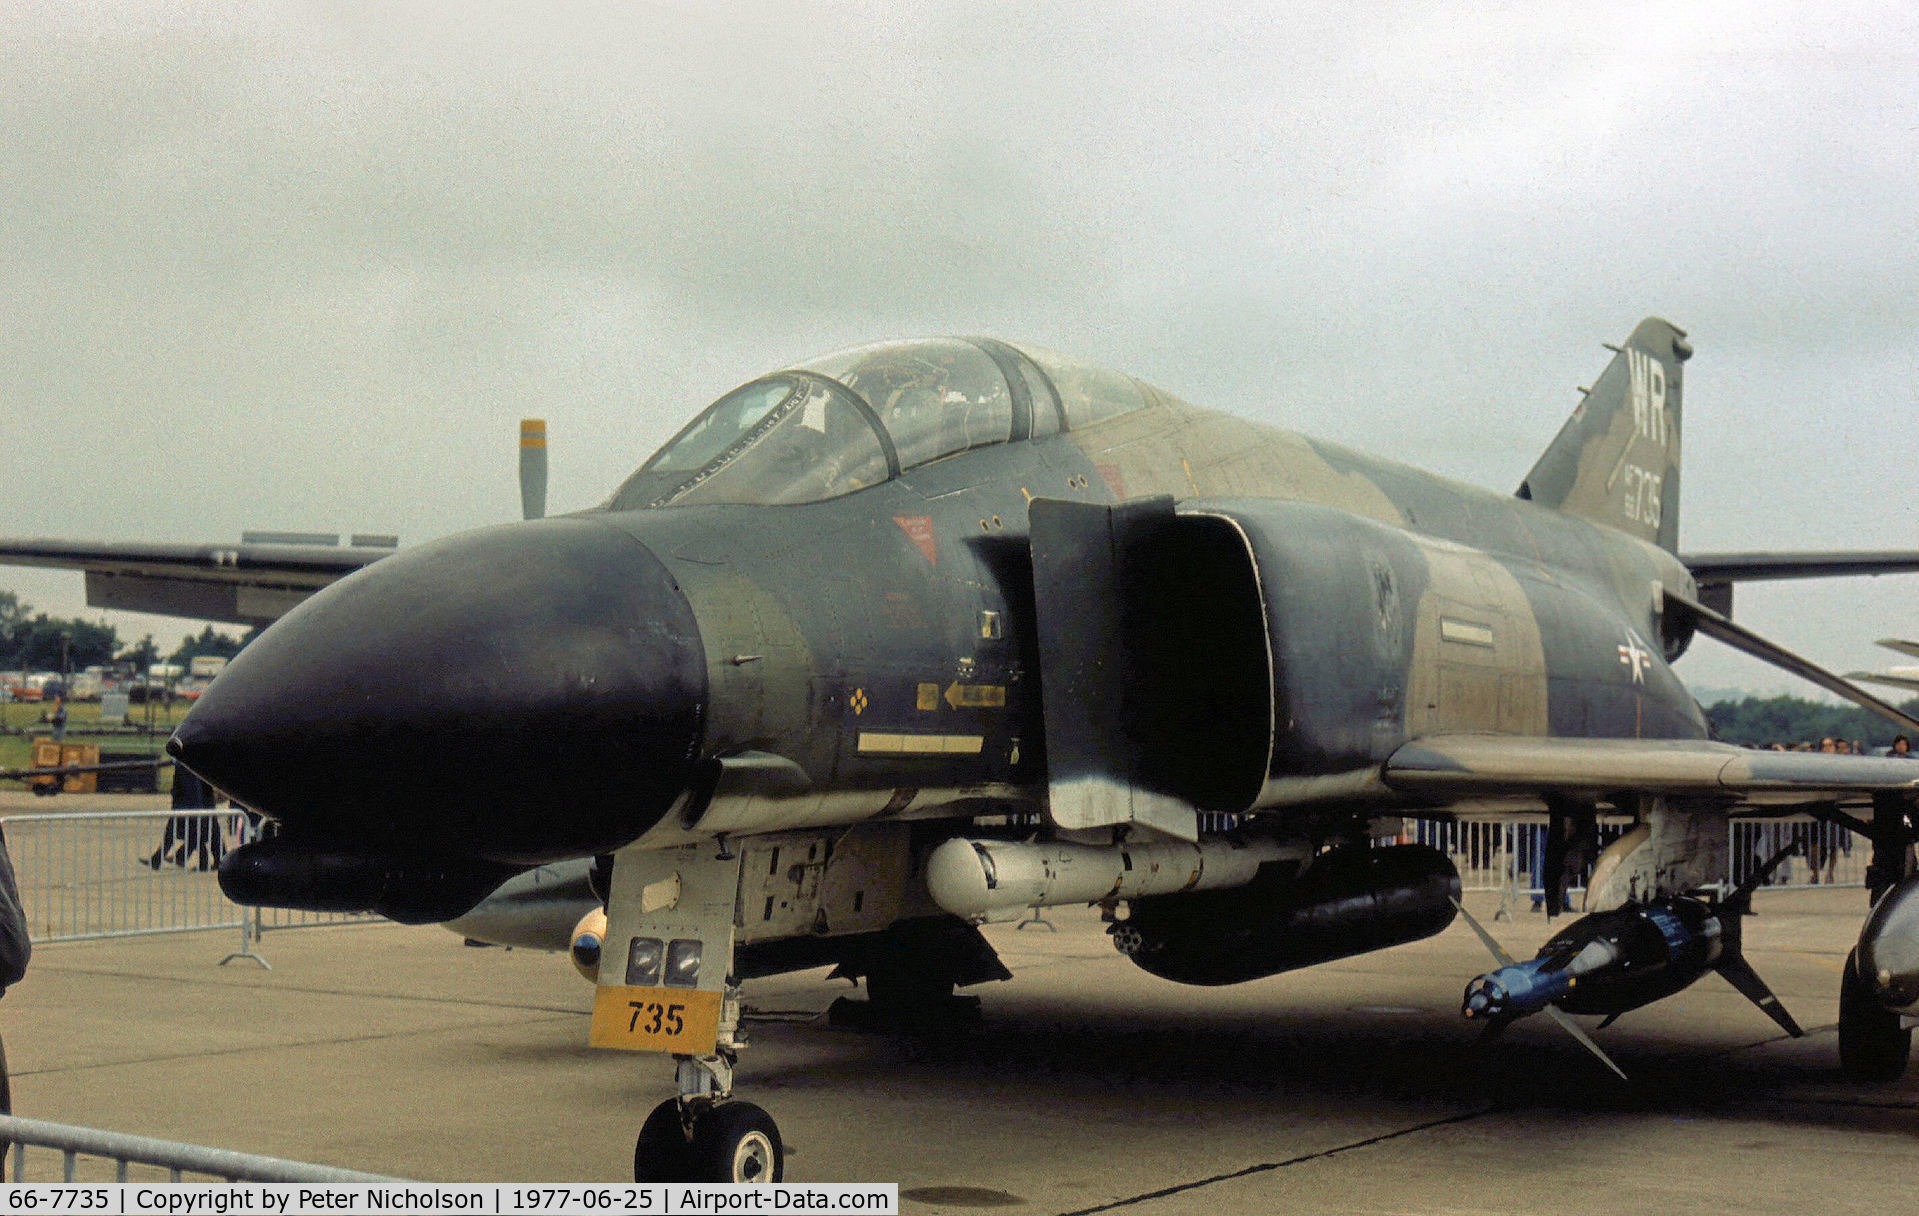 66-7735, 1966 McDonnell F-4D Phantom II C/N 2365, F-4D Phantom of 92nd Tactical Fighter Squadron/81st Tactical Fighter Wing based at Bentwaters on display at the 1977 Intnl Air Tattoo at RAF Greenham Common.